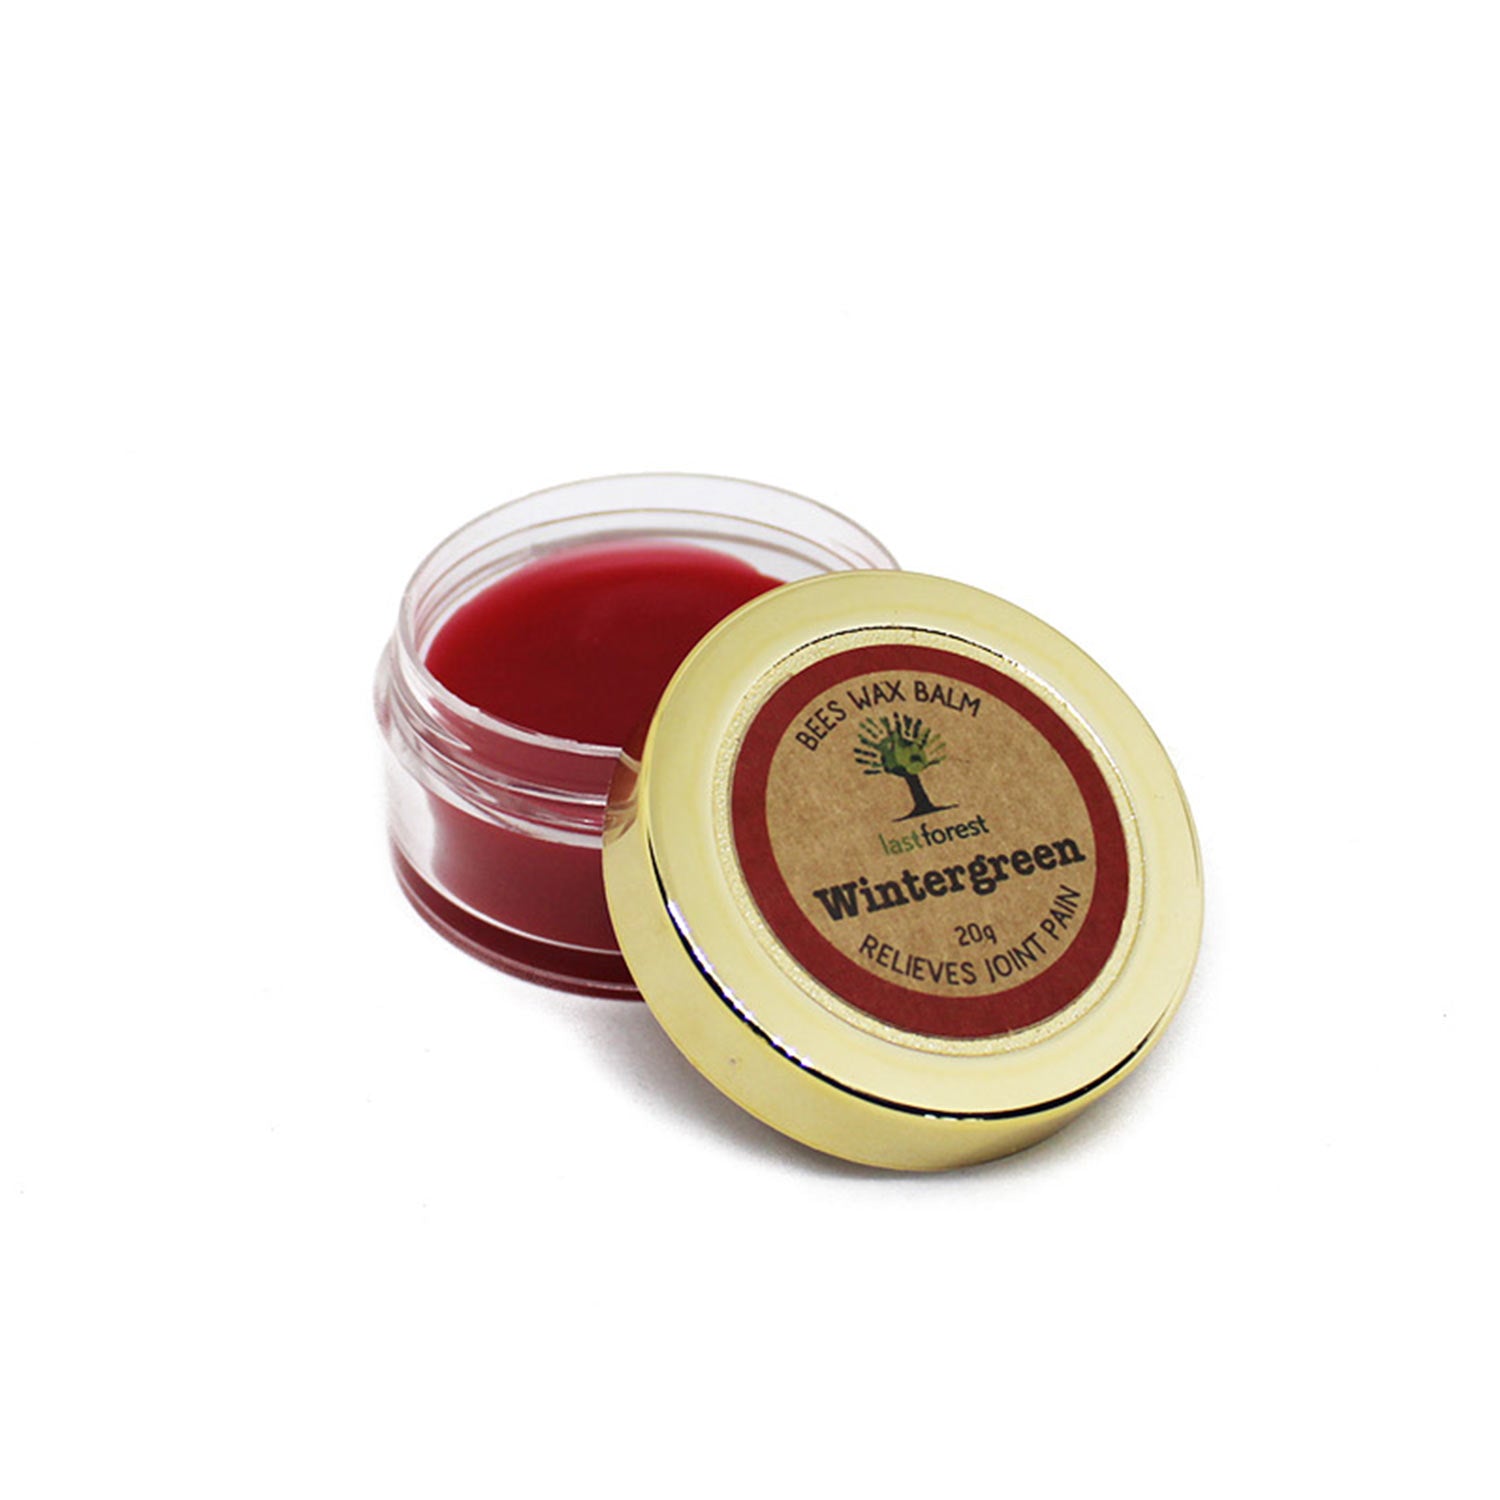 Last Forest Wintergreen Balm for massage, soothes sore muscles and inflamed joints, 20g